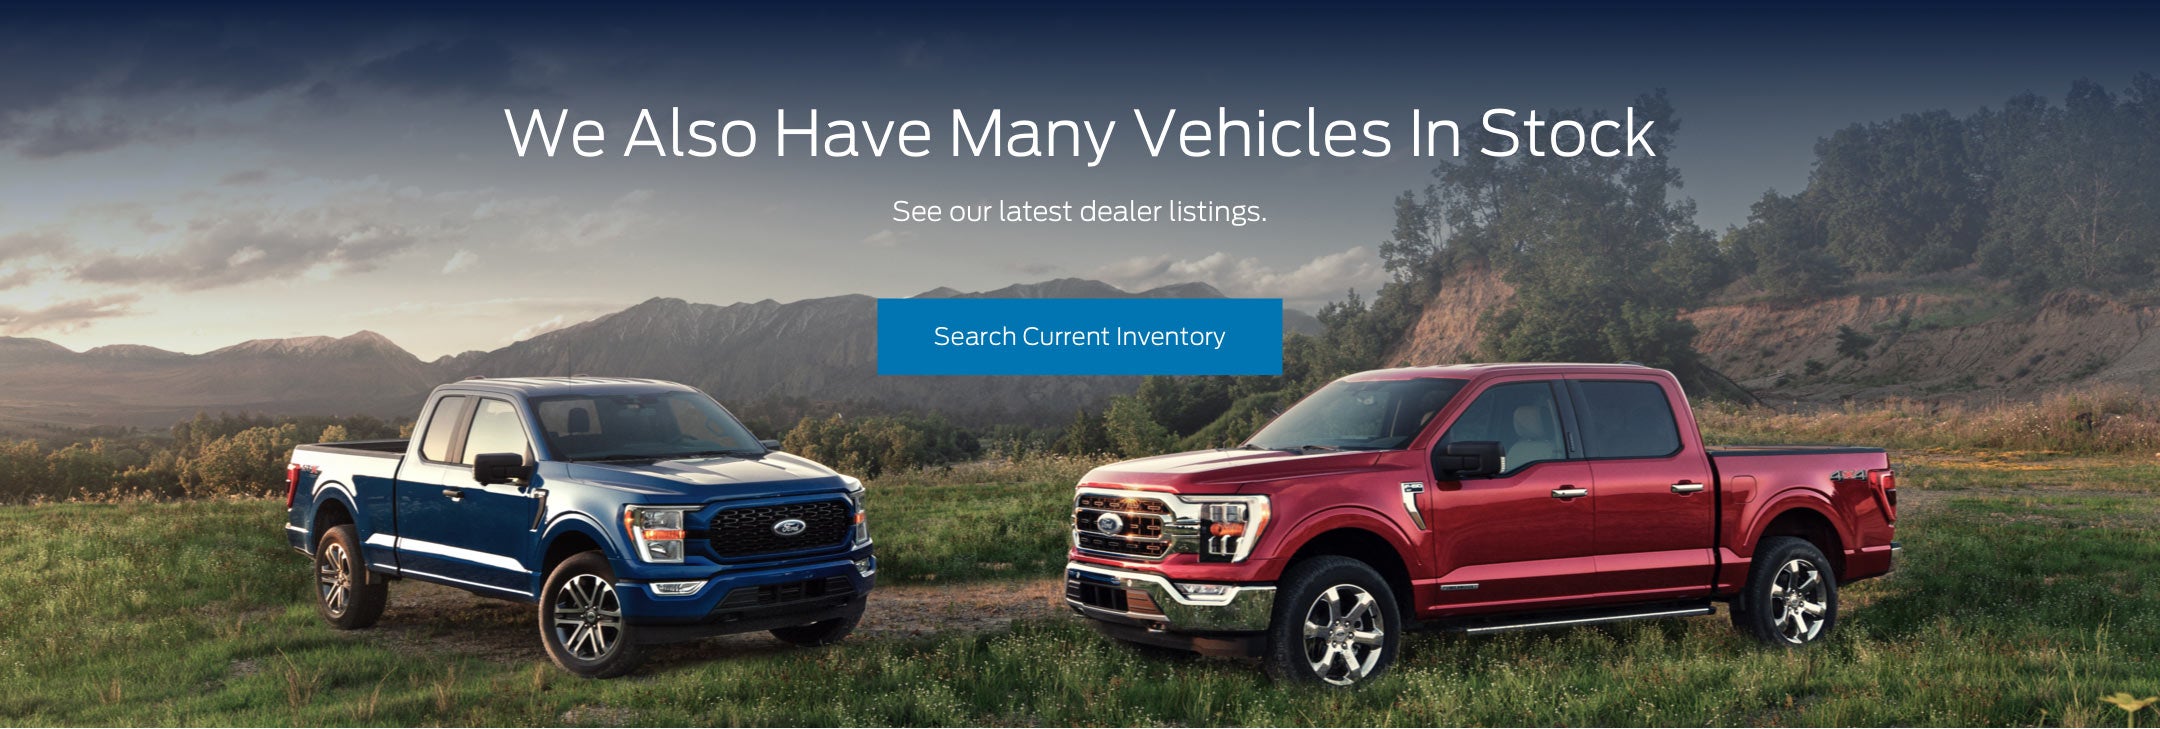 Ford vehicles in stock | Crain Ford of Little Rock in Little Rock AR